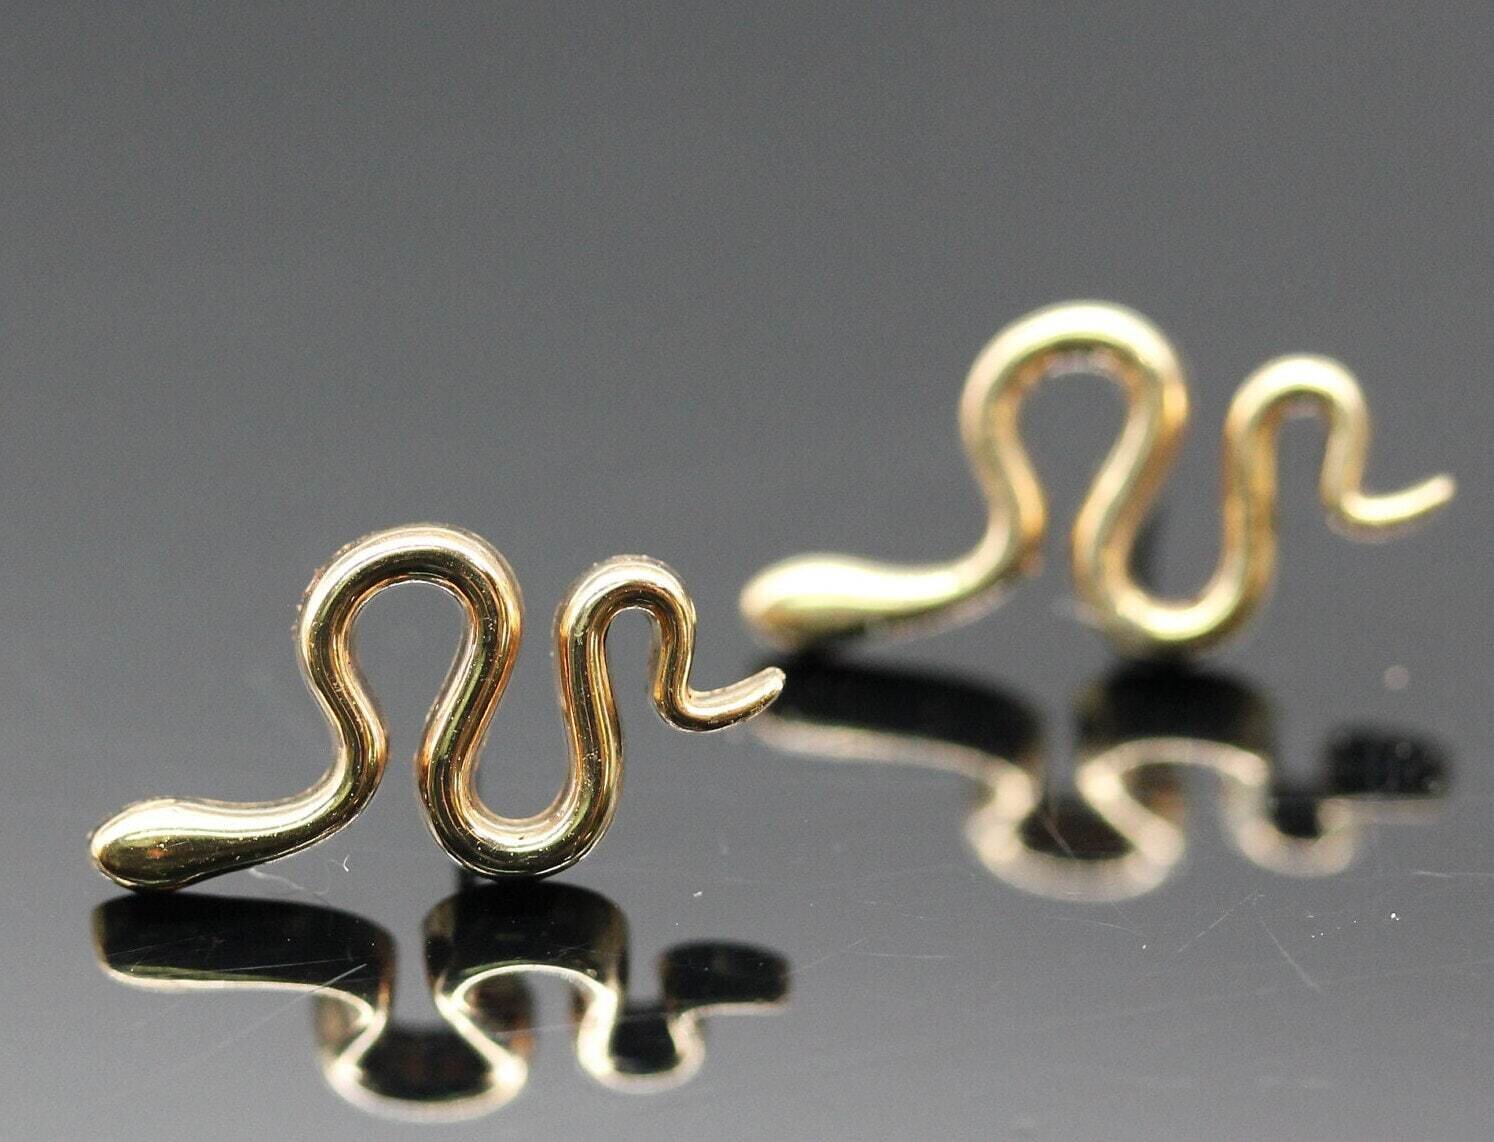 Snake push pin 14k solid Gold (NOT plated or filled)